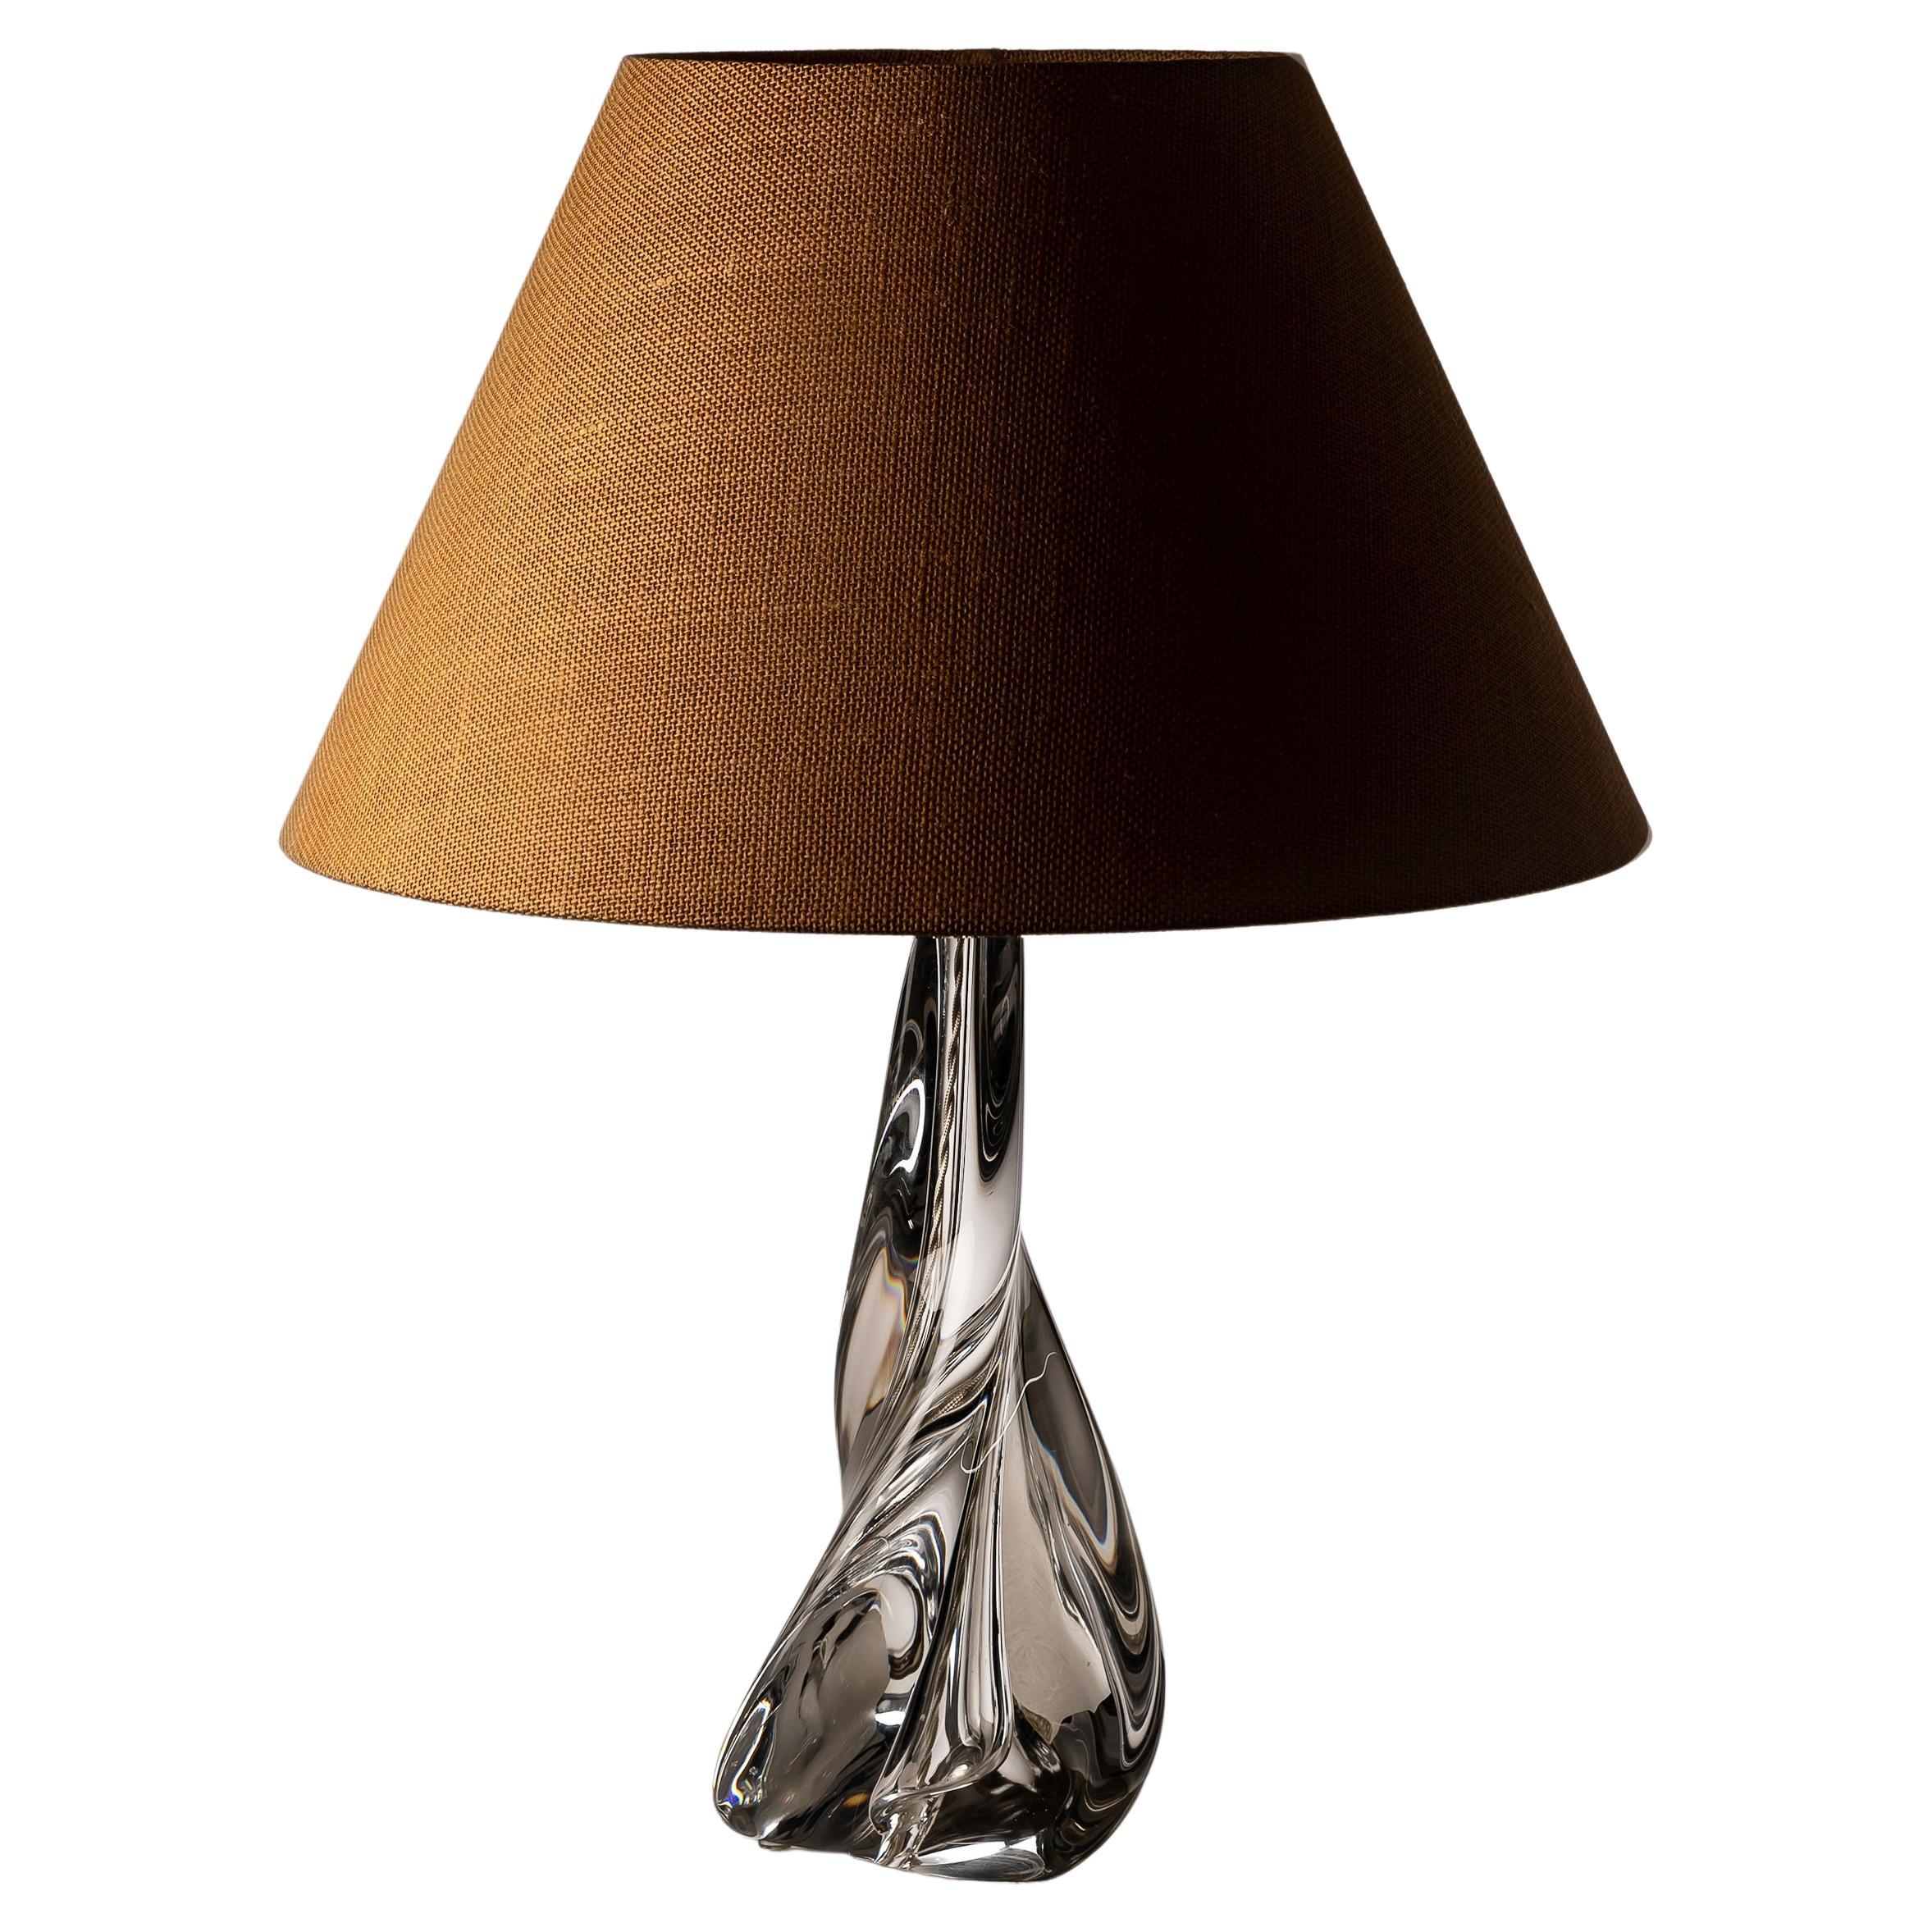 This French Twisted Crystal table lamp by Saint Louis from the 1950s presents an irresistible opportunity to infuse your space with timeless elegance and unparalleled craftsmanship. Saint Louis, renowned for its centuries-old tradition of